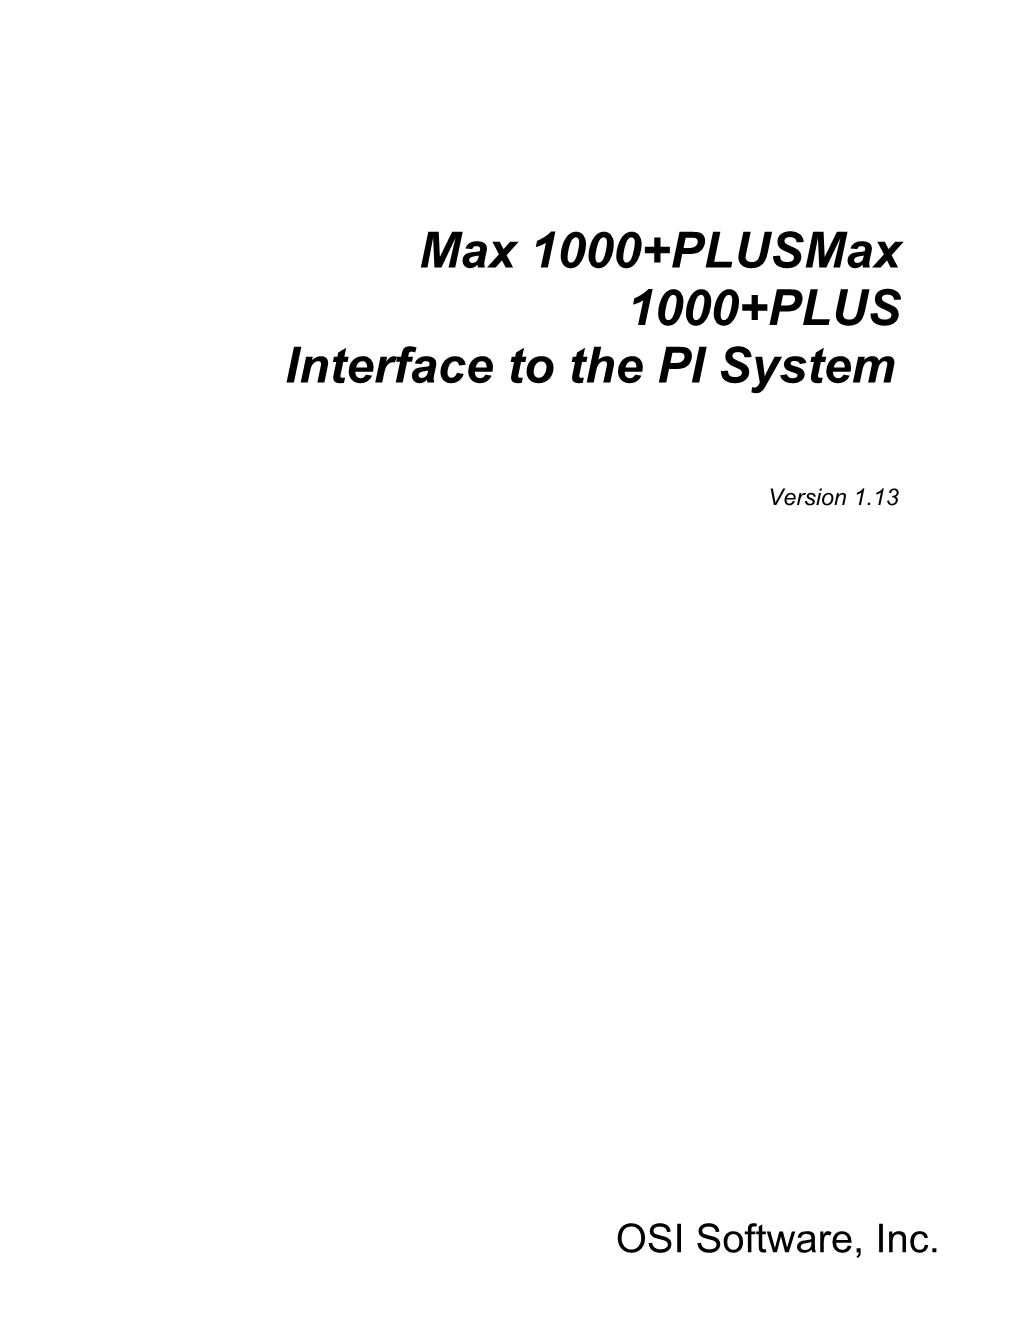 Max 1000+PLUS Interface to the PI System